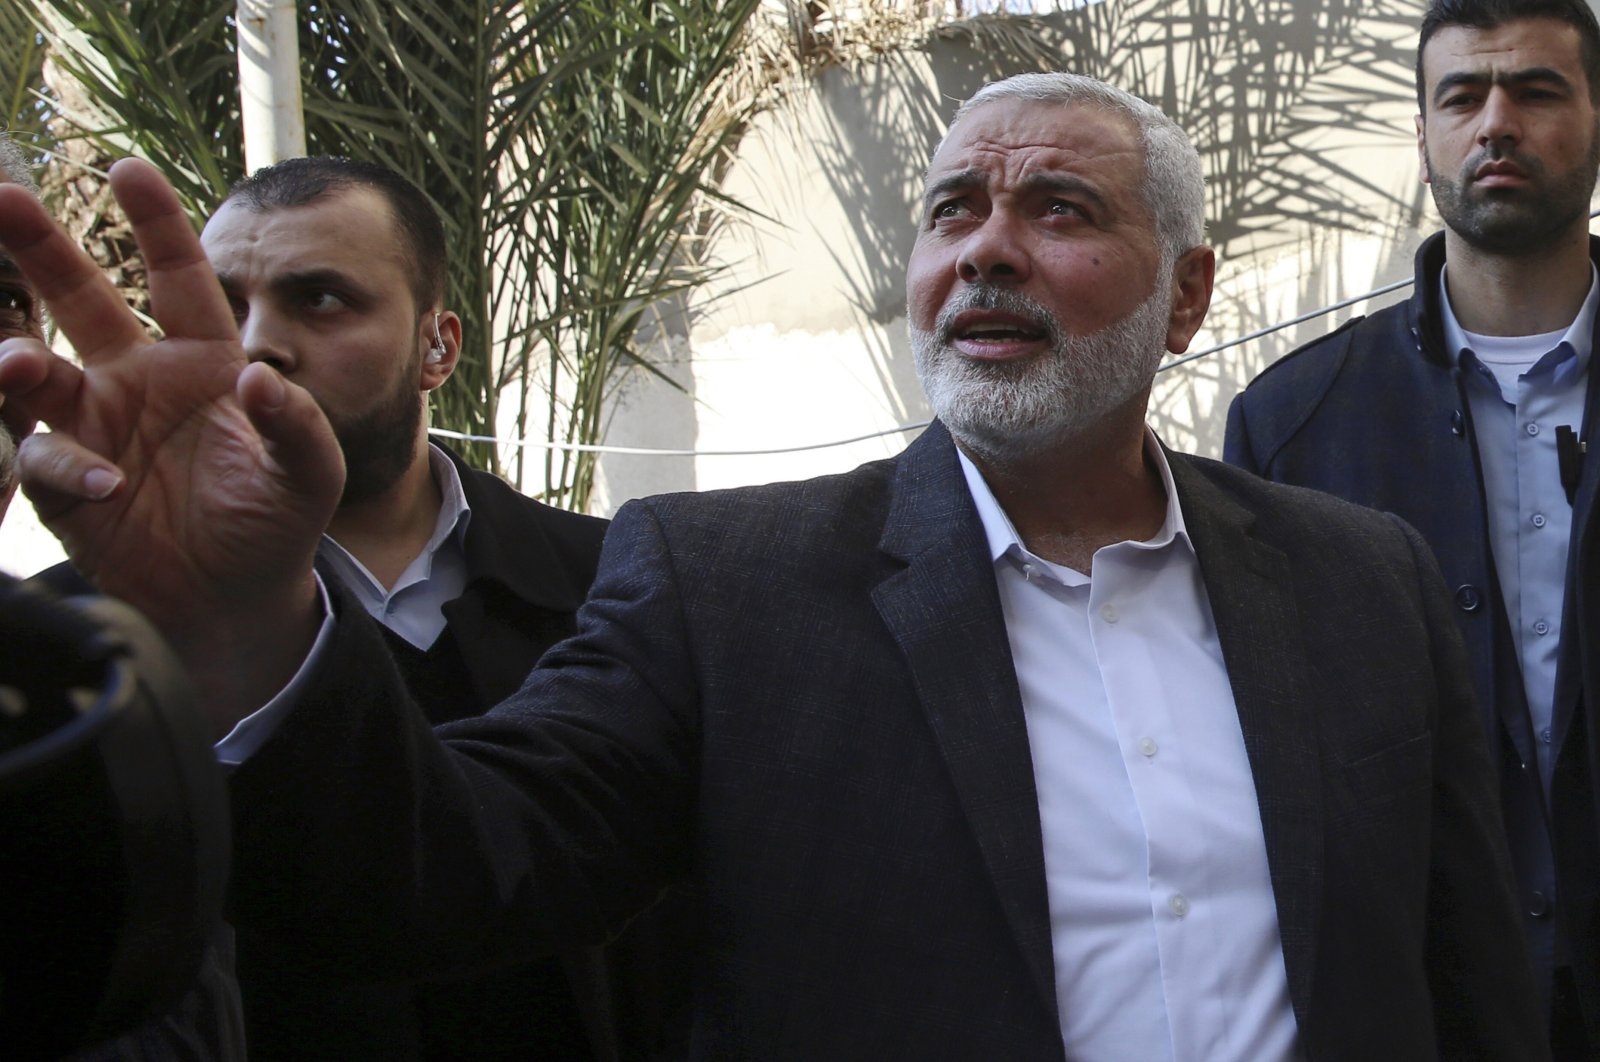 Hamas leader Ismail Haniyeh tours the site of a destroyed building, in Gaza City, Palestine, March 27, 2019. (AP File Photo)